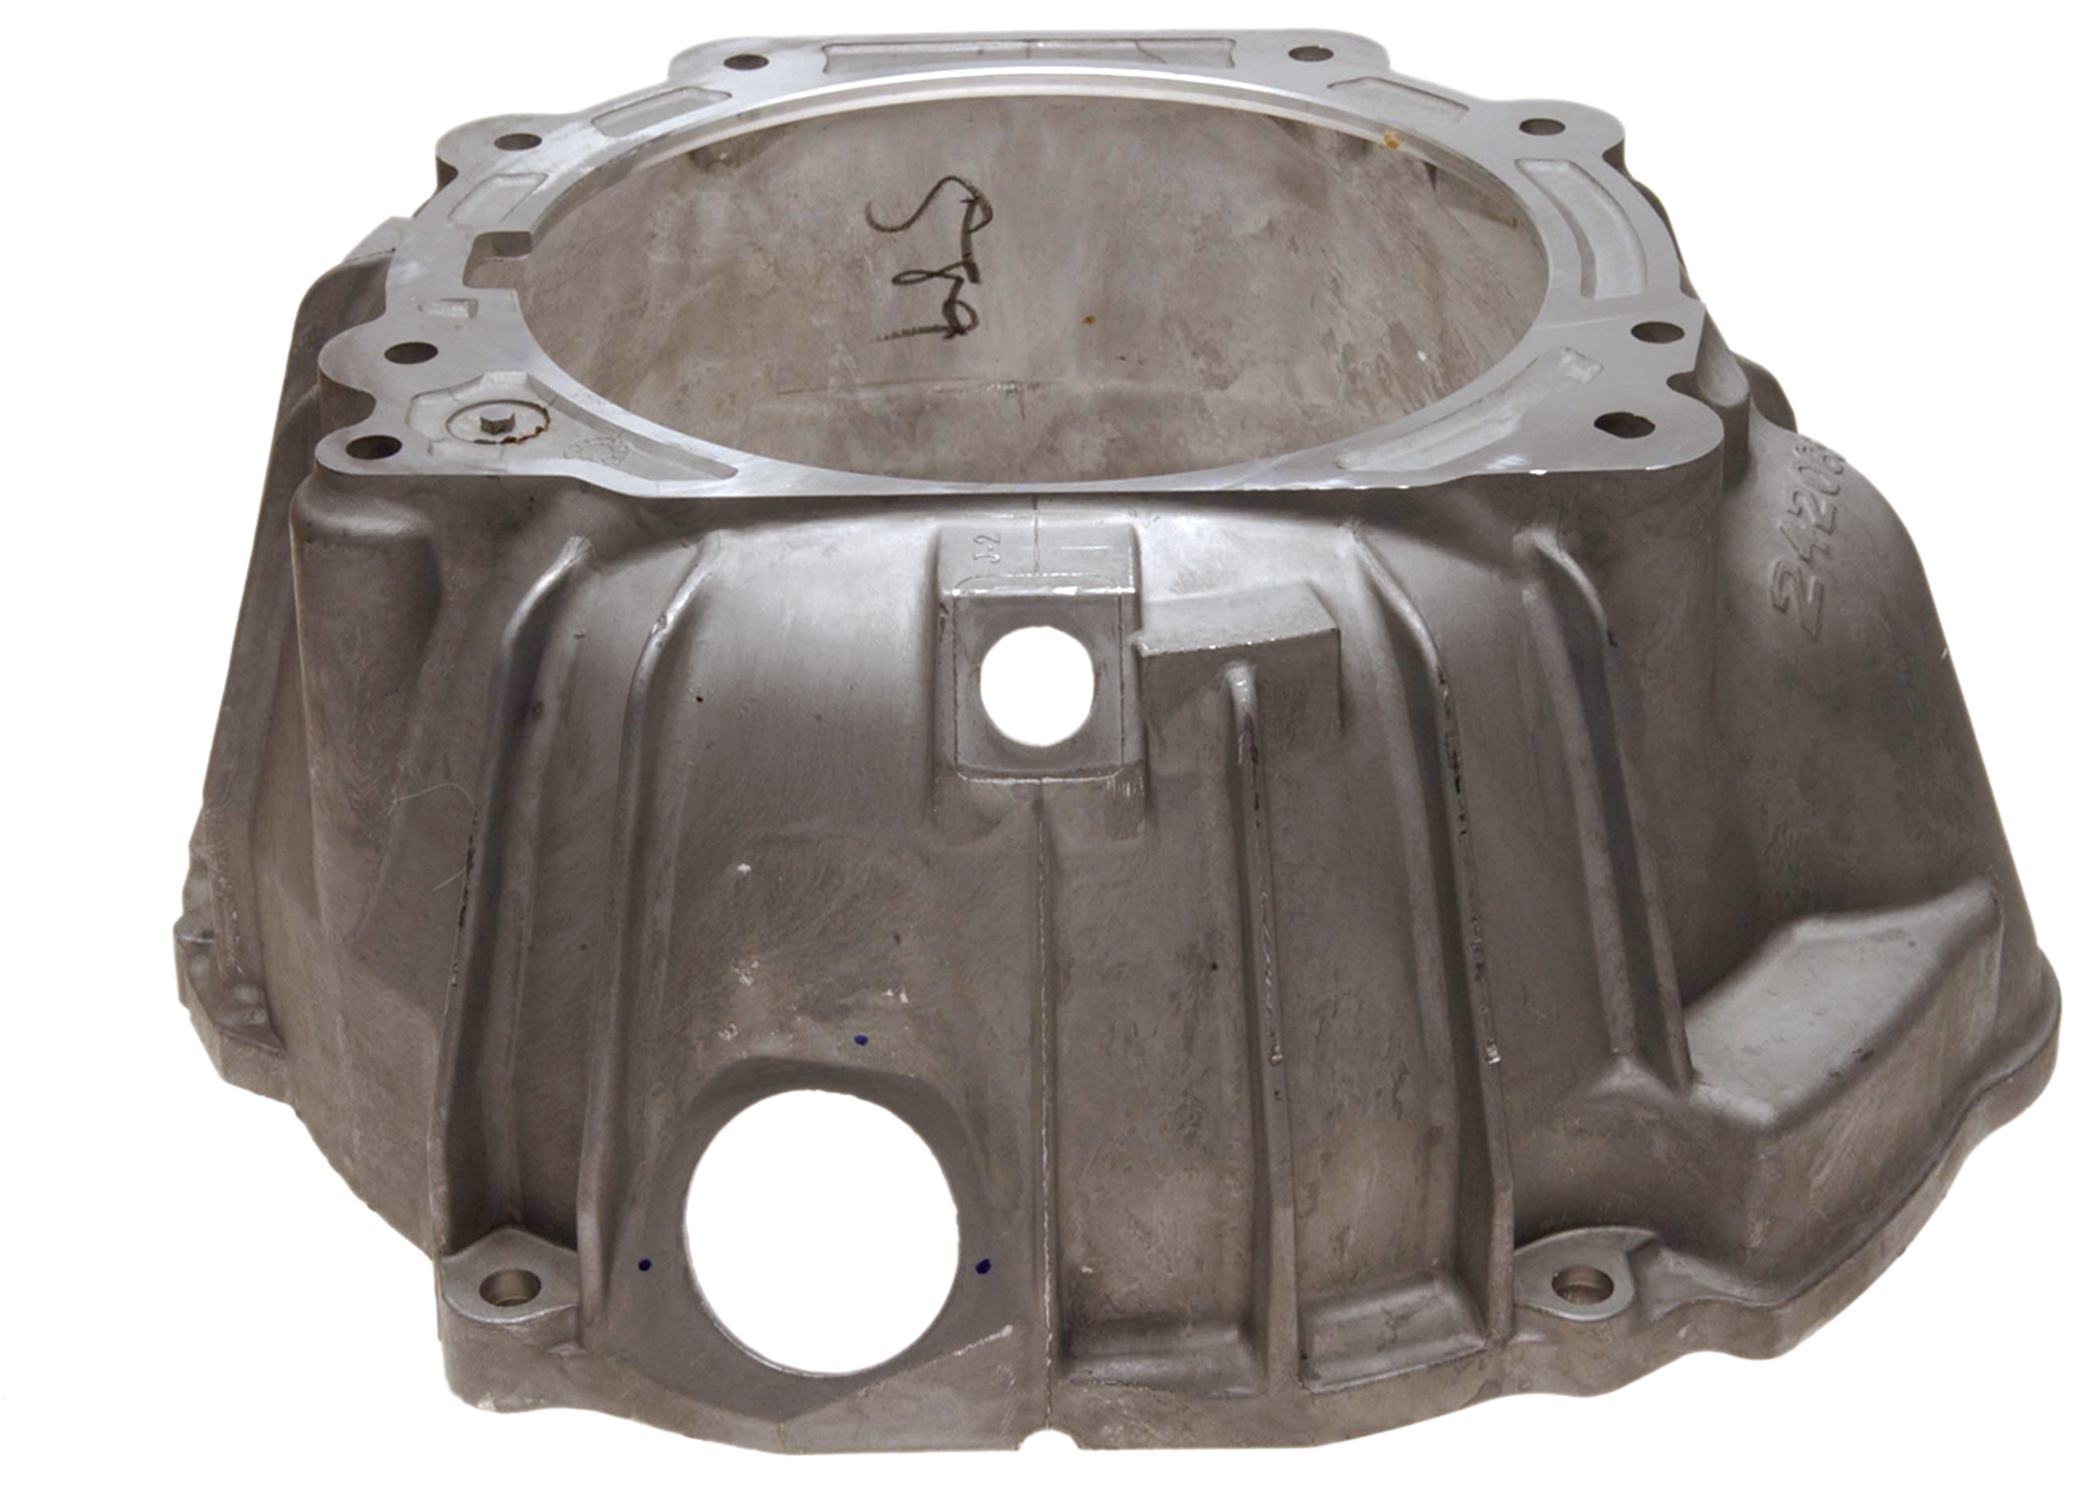 GM GENUINE PARTS - Transmission Bell Housing - GMP 24206953